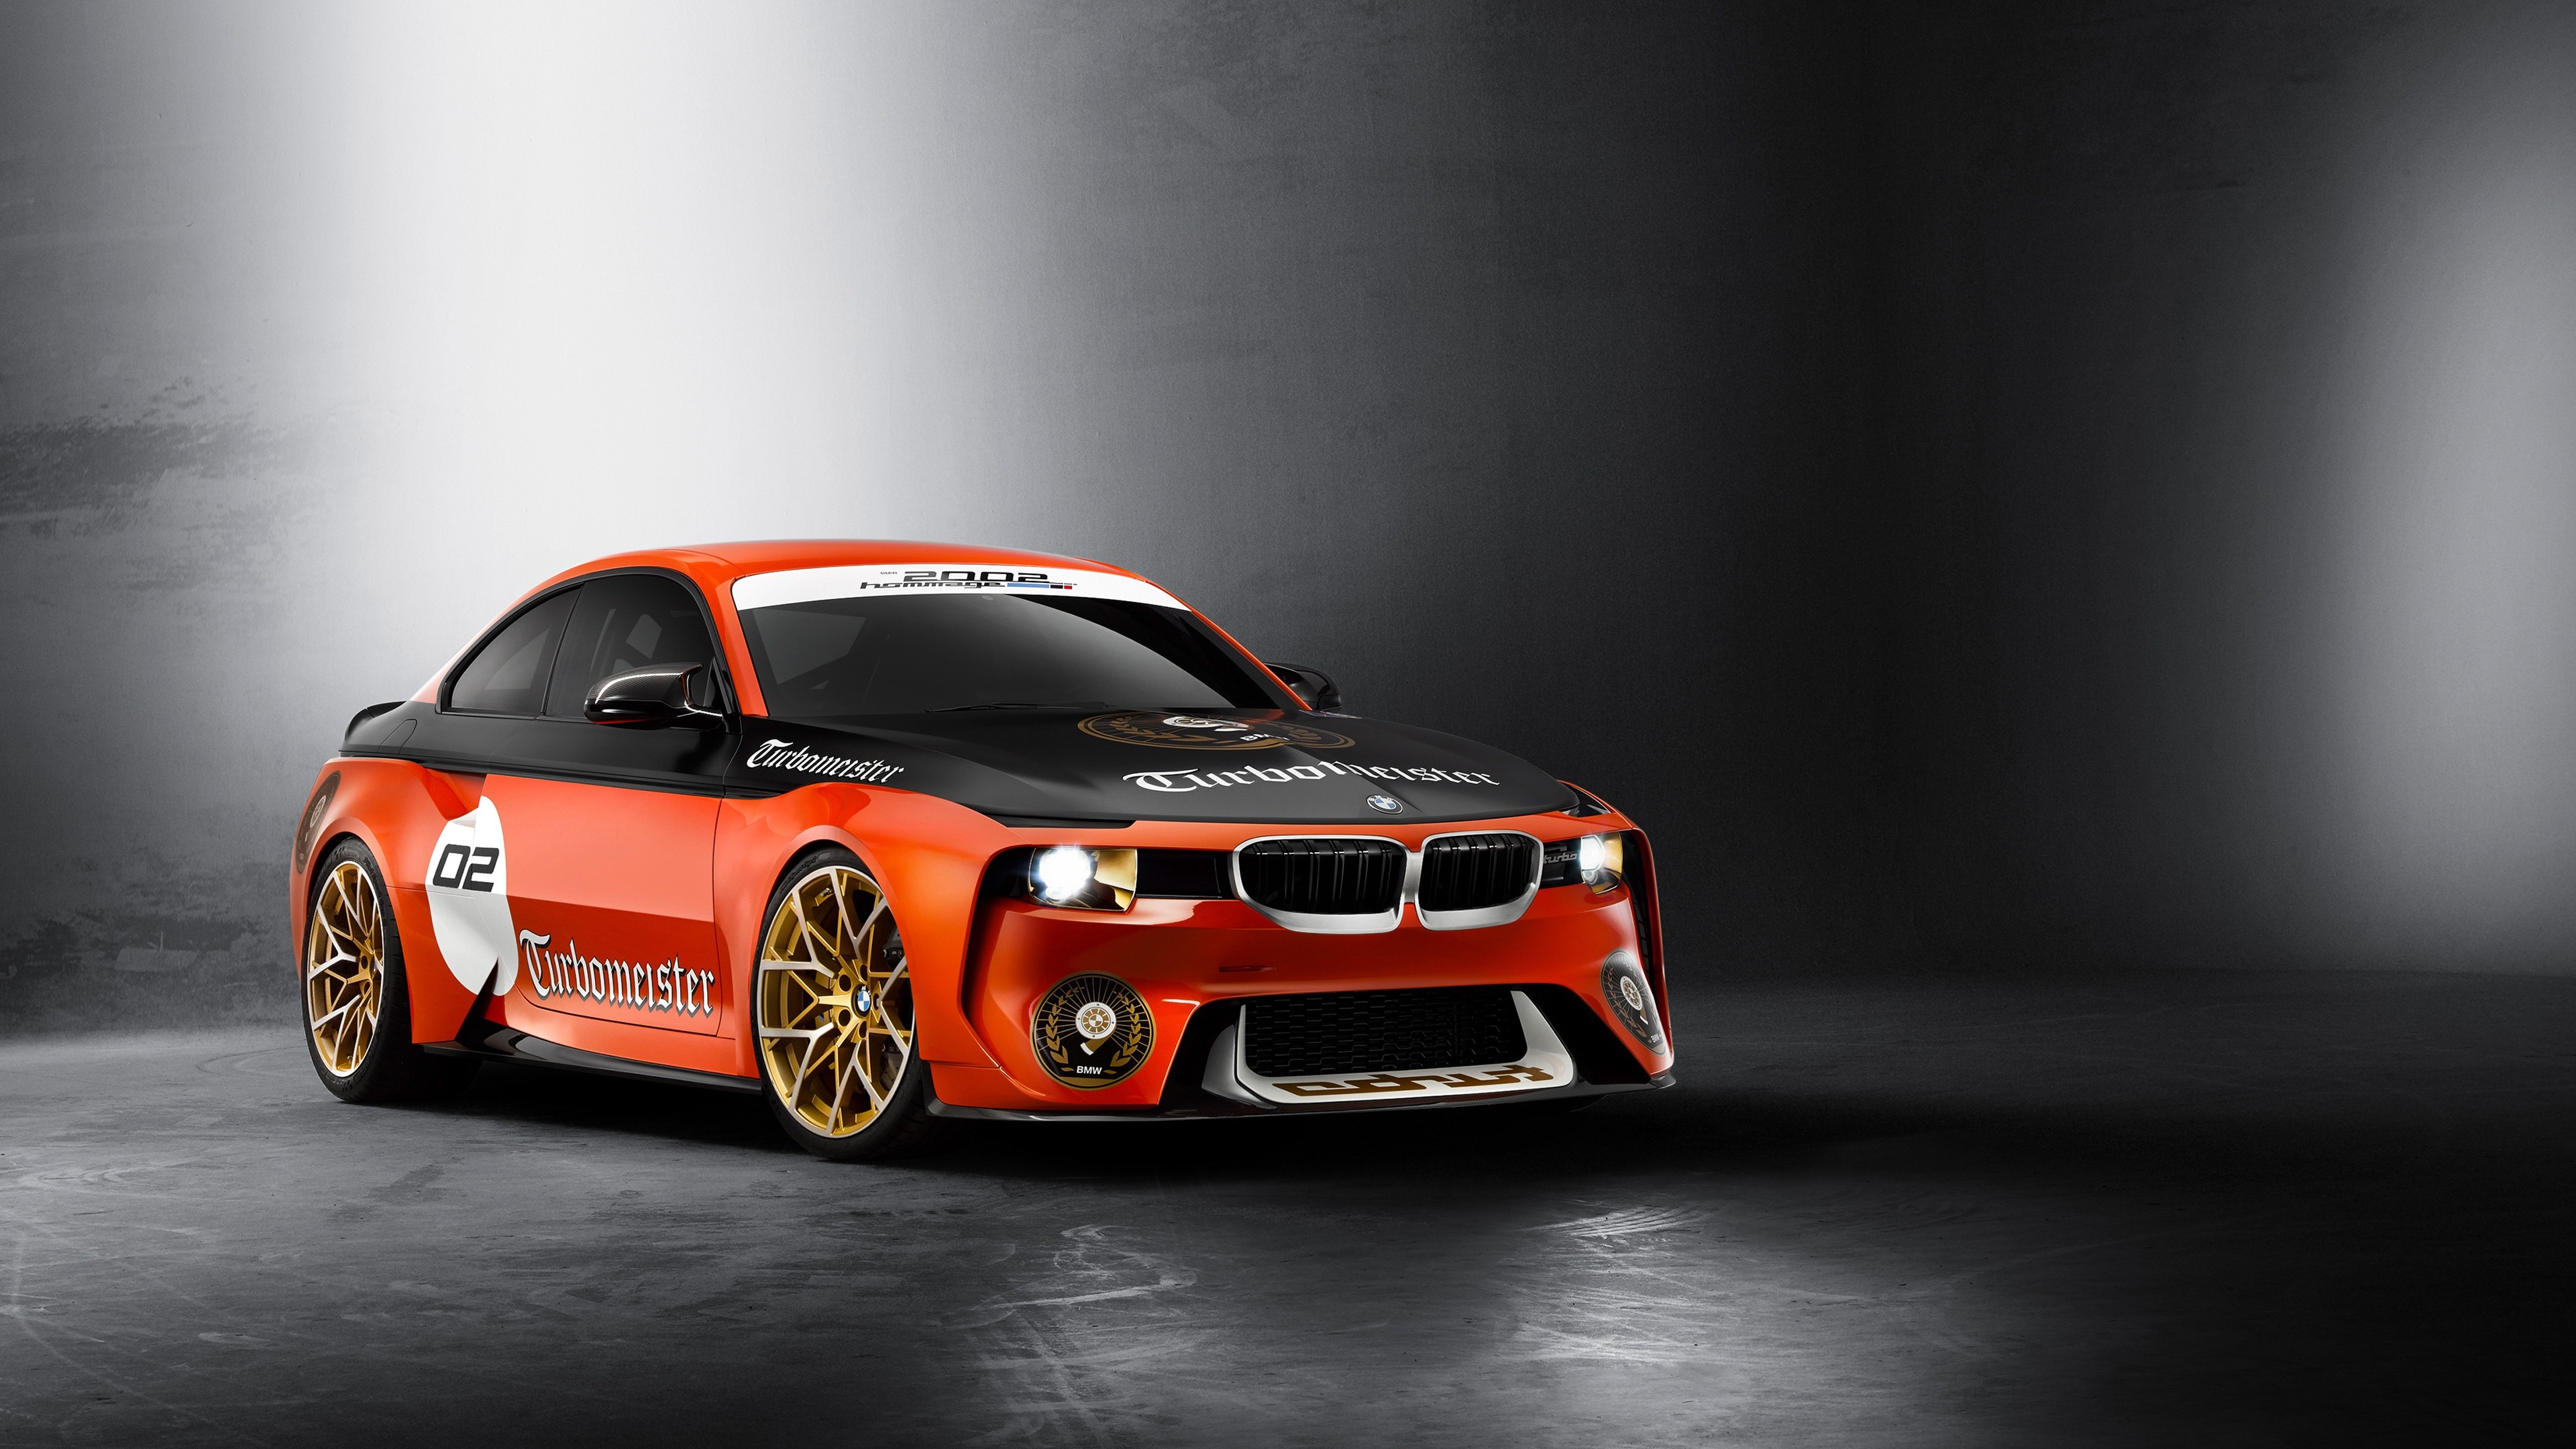 General 3840x2160 car BMW 2002 Hommage BMW vehicle red cars